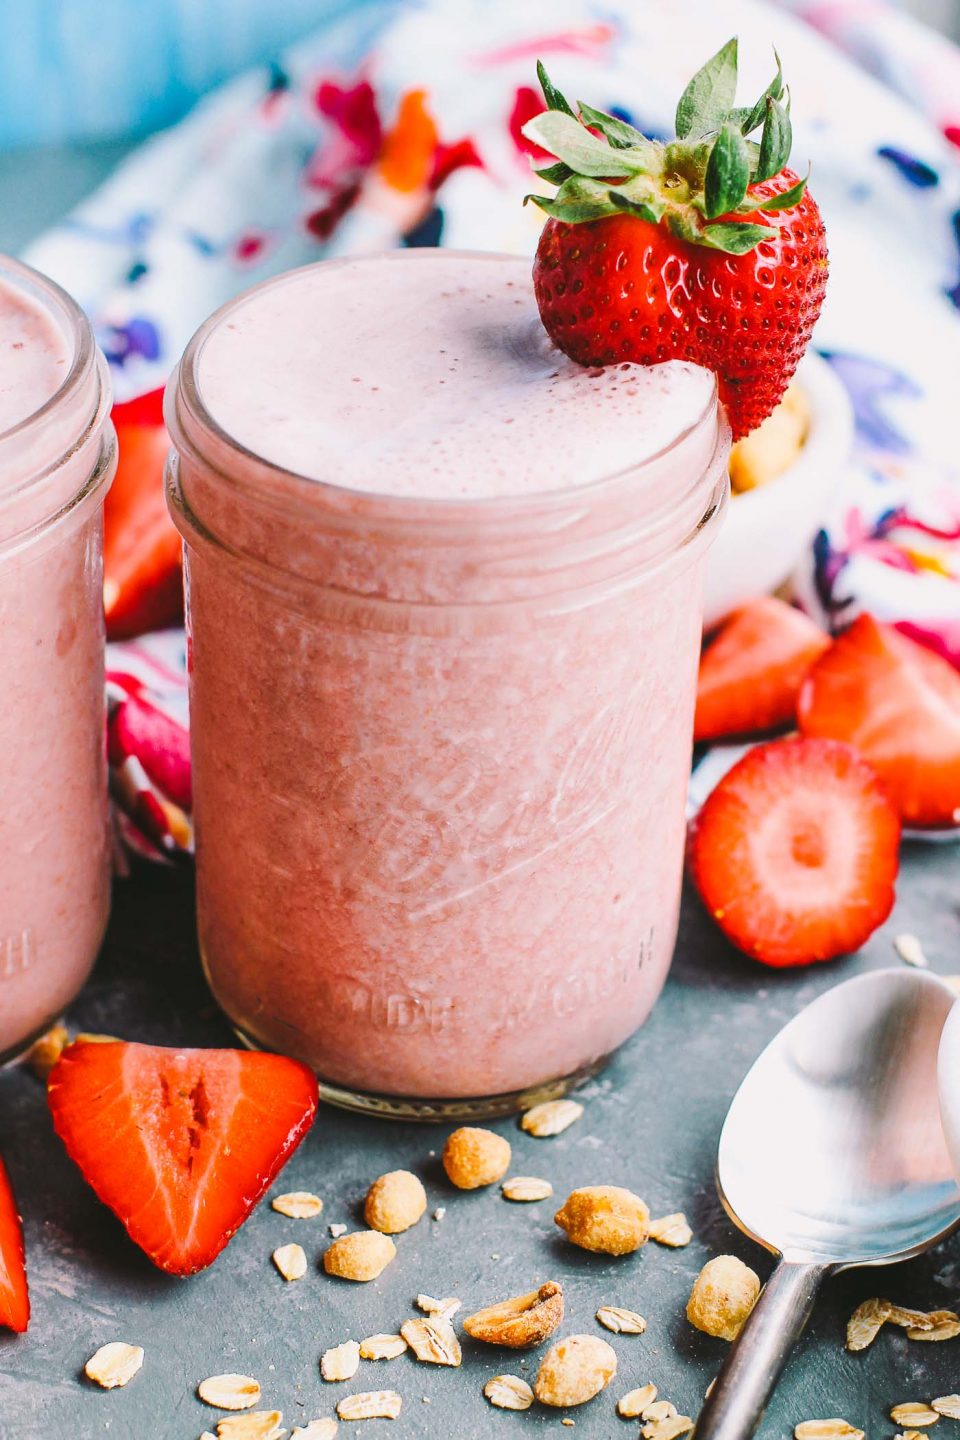 a creamy, delicious smoothie recipe for an easy, healthy breakfast for any busy weekday mornings! these peanut butter & jelly strawberry smoothies are loaded with strawberries, peanut butter, & oats to keep you full until lunchtime. | smoothie, healthy smoothie, protein shake, healthy breakfast, smoothie pack, gluten free, vegan, iifym |